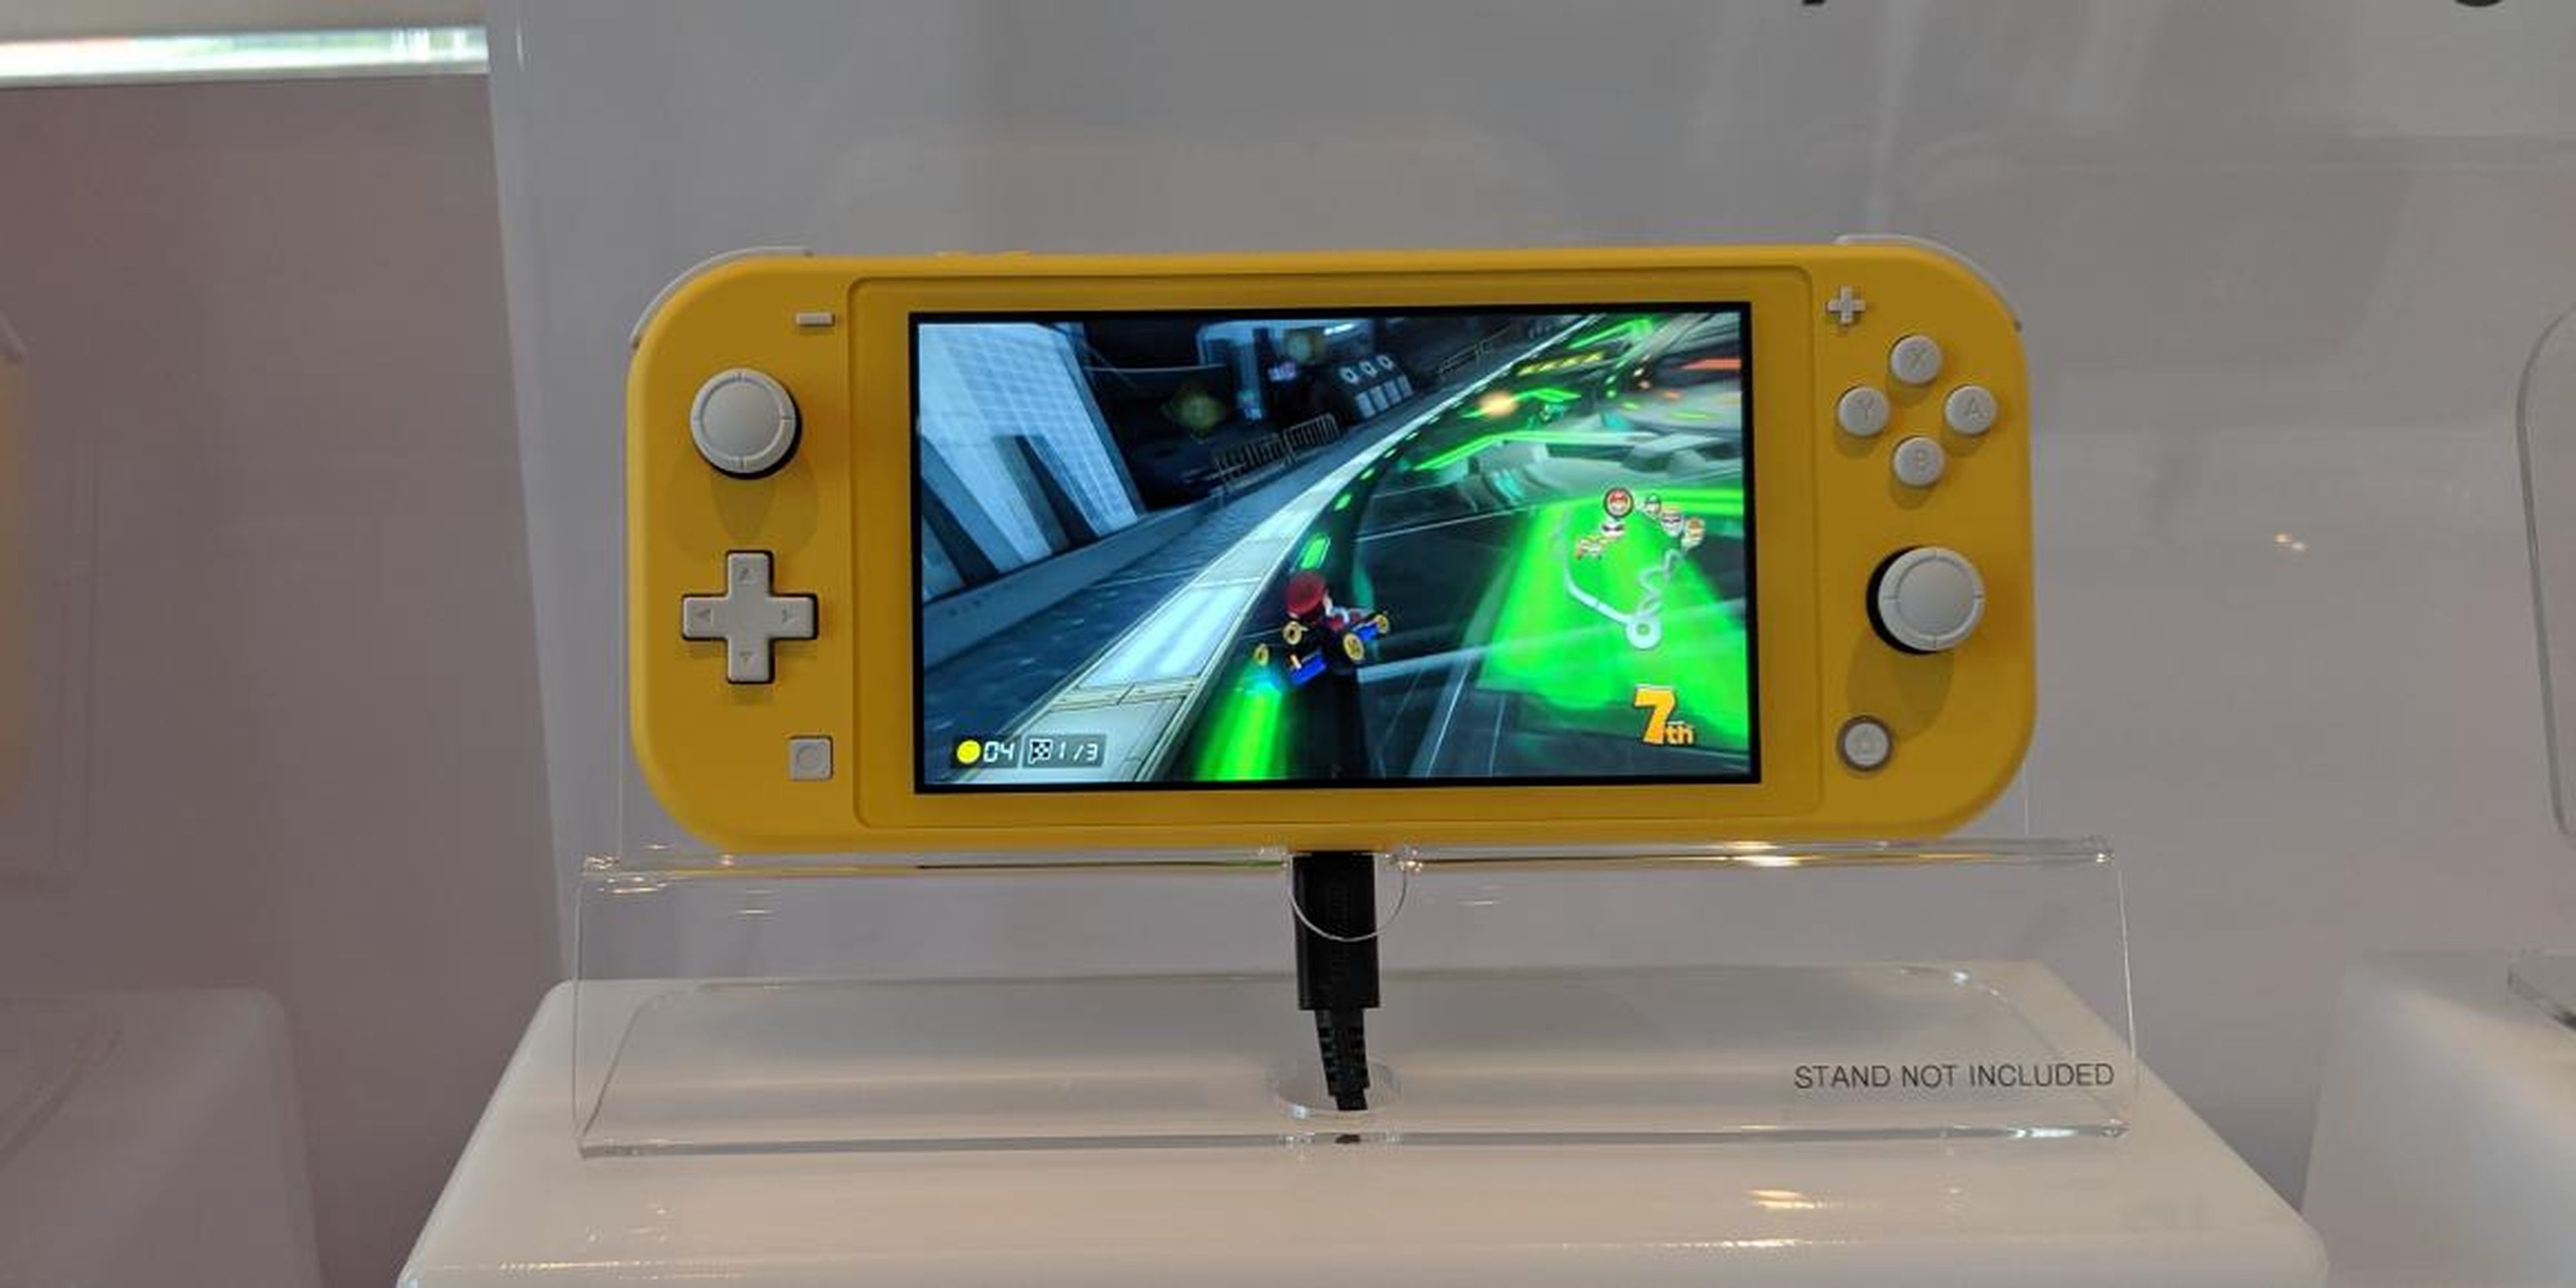 Yellow has been a common color for Nintendo's handheld consoles in the past — the GameCube came in a yellow variation called "spice."